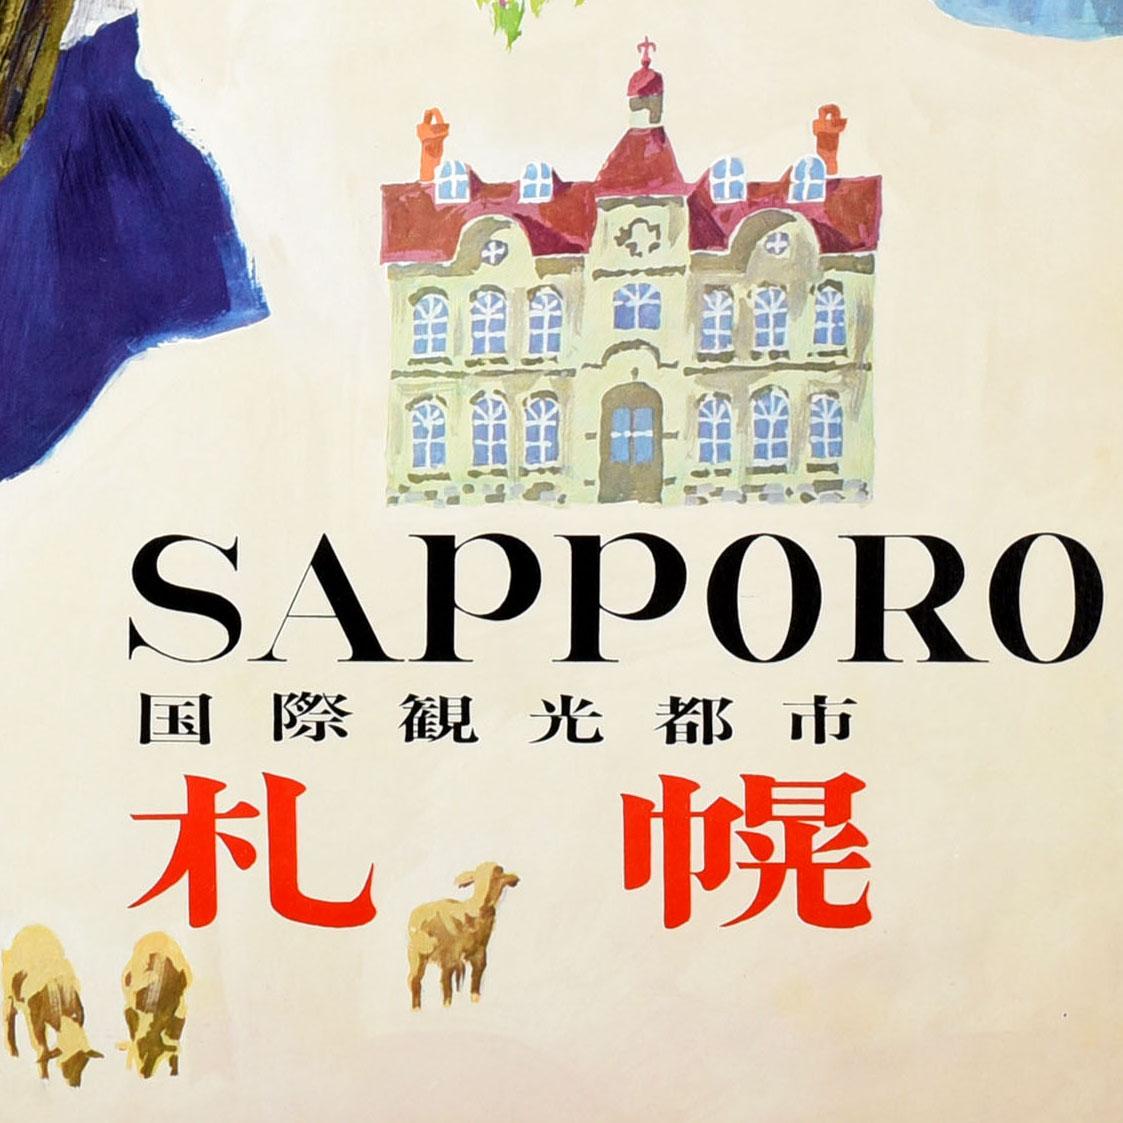 Original vintage travel poster for Sapporo the Tourist City features a lady carrying a basket of corn with illustrations of the city's historic and modern architecture in the background including a clock tower, red brick building, trees and flowers,